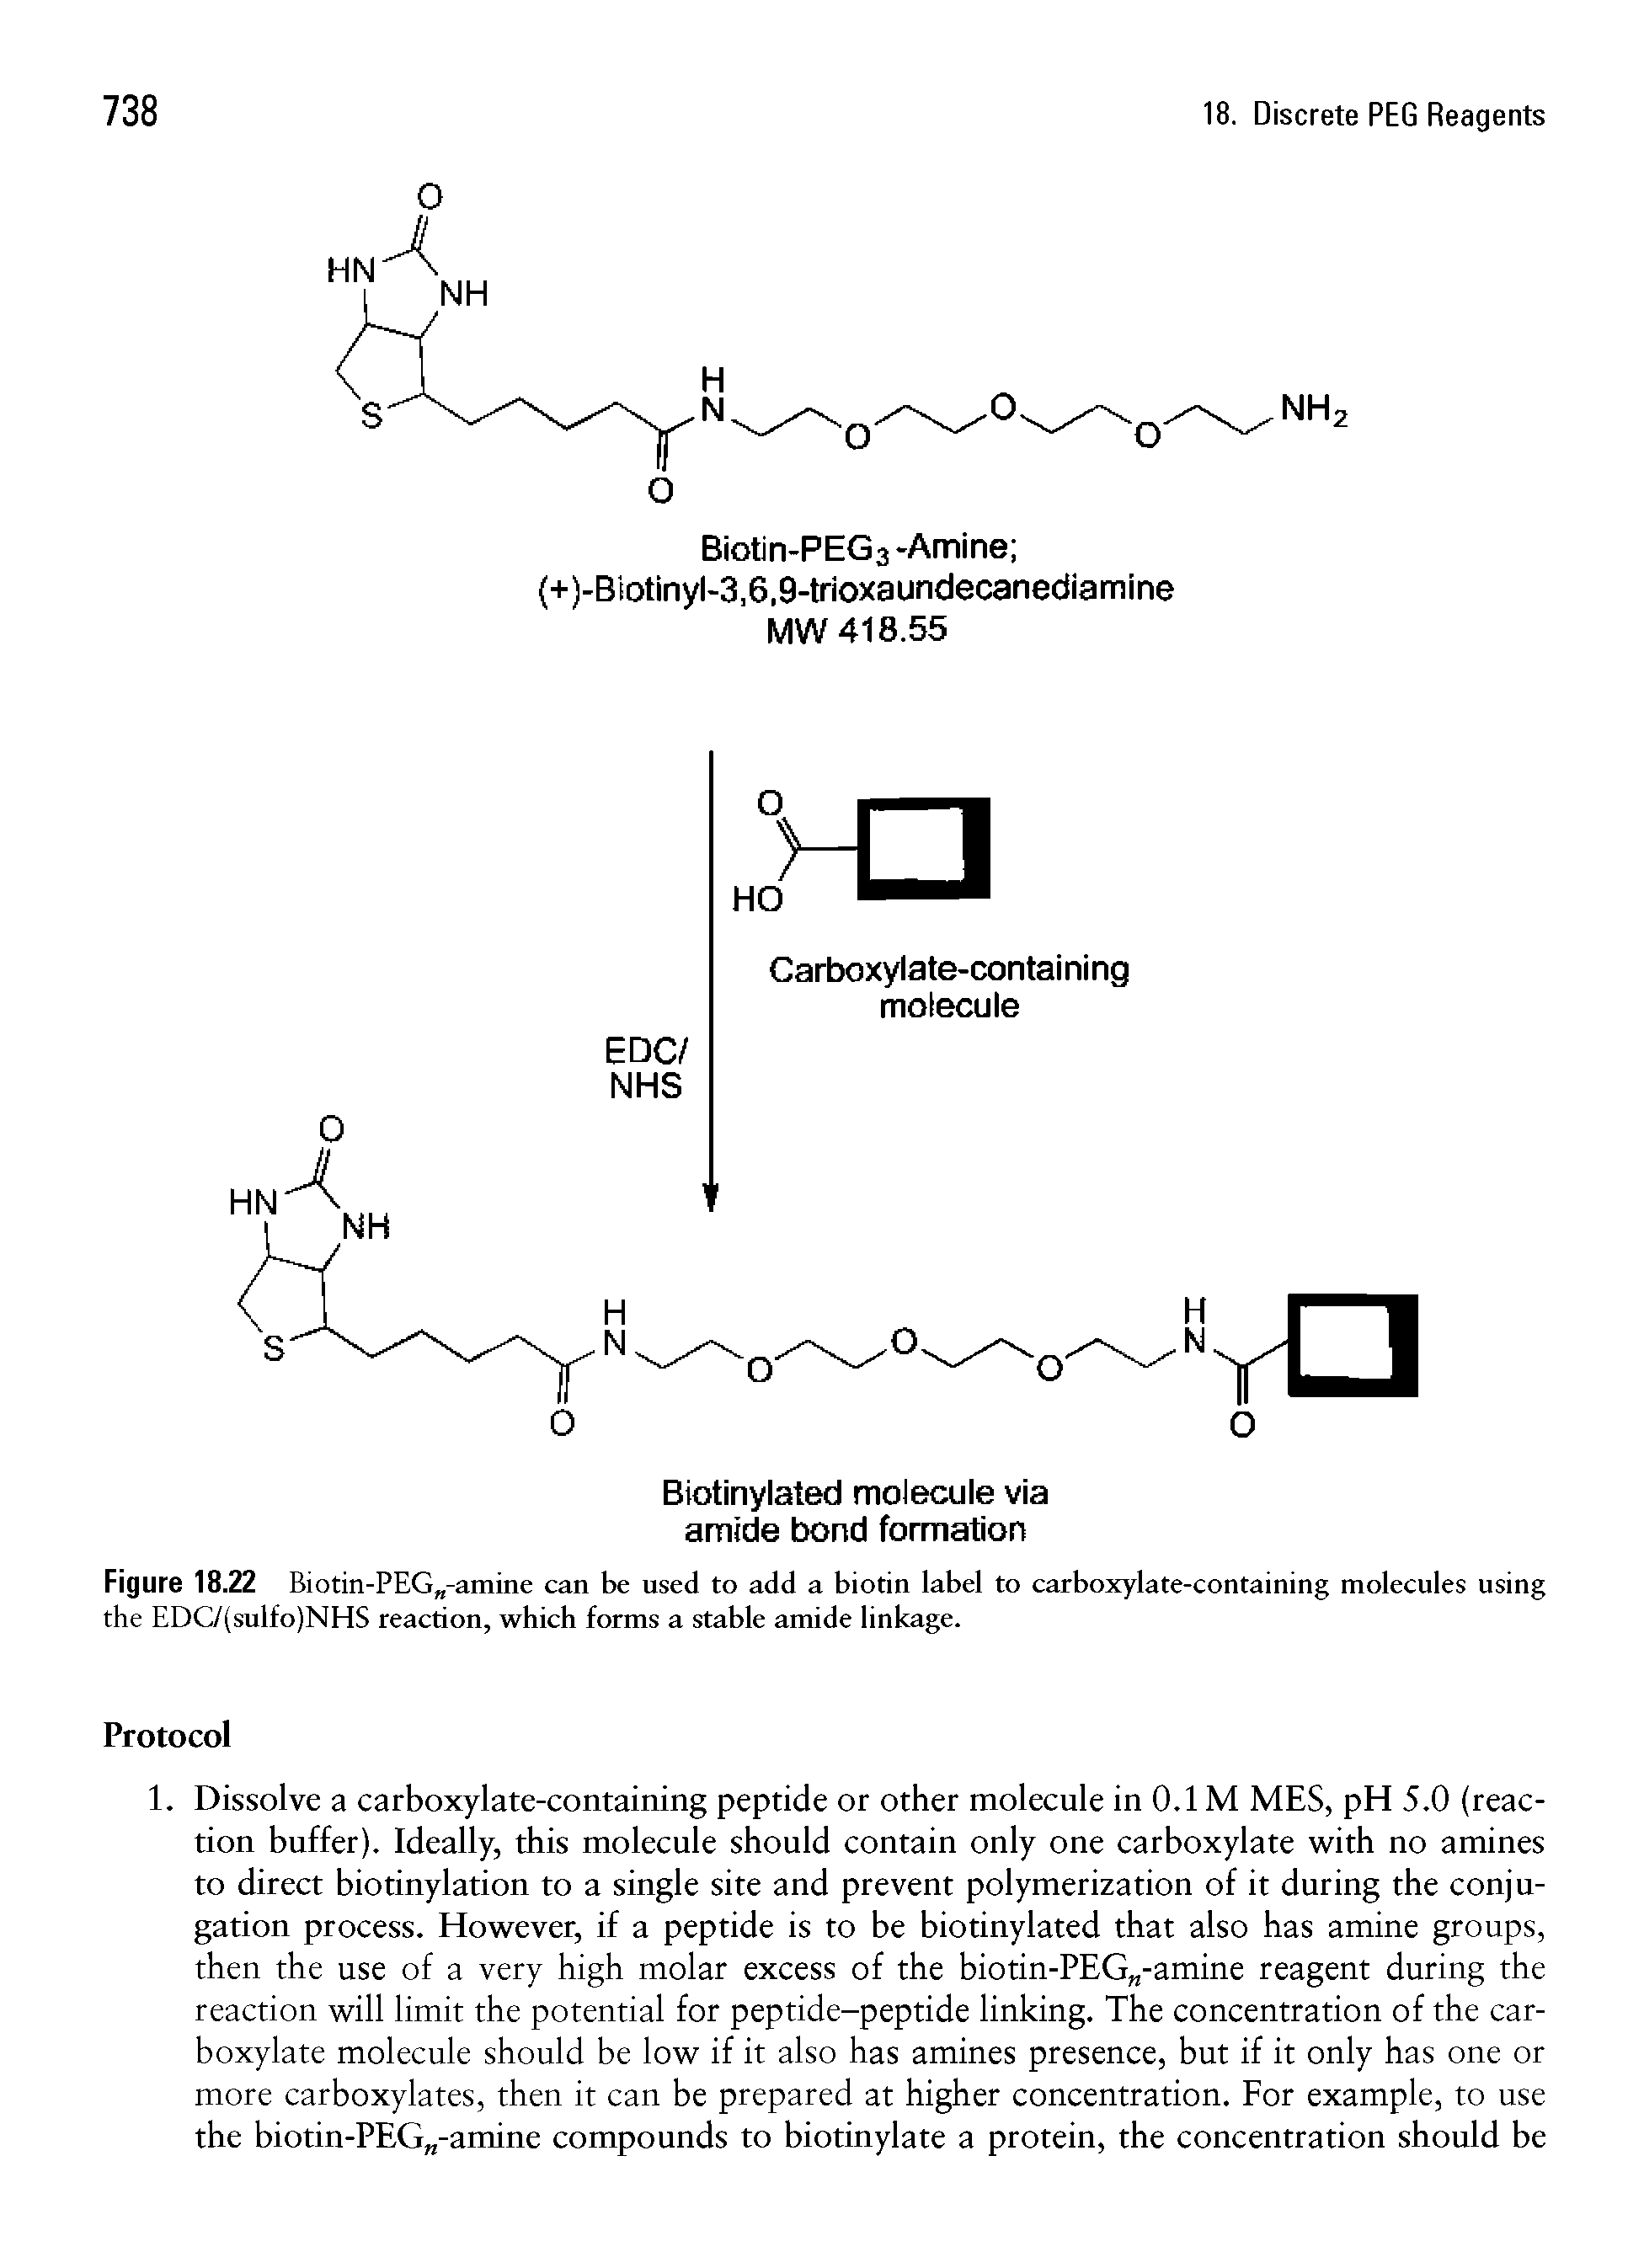 Figure 18.22 Biotin-PEG -amine can be used to add a biotin label to carboxylate-containing molecules using the EDC/(sulfo)NHS reaction, which forms a stable amide linkage.